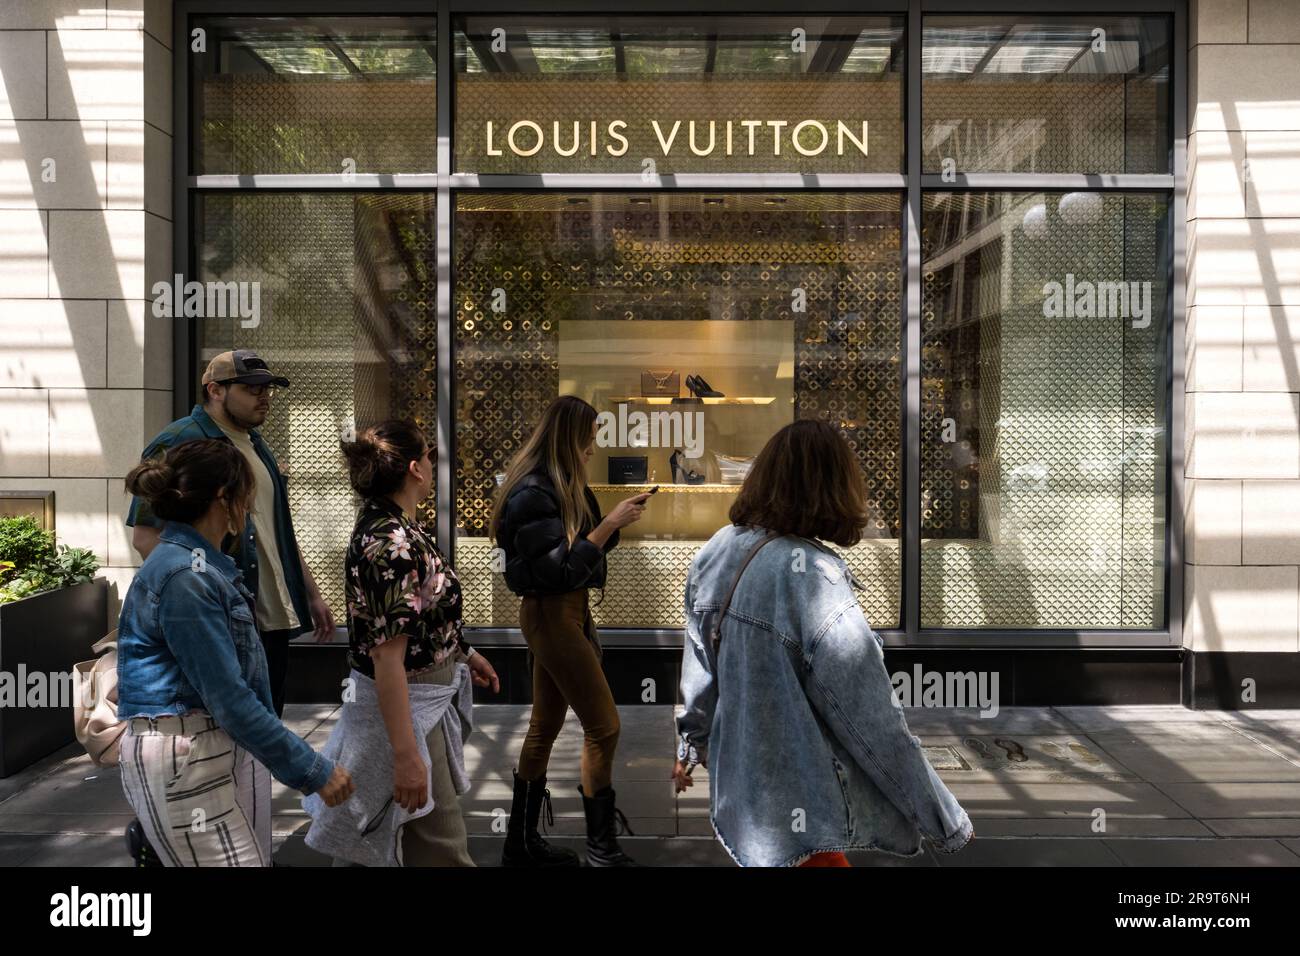 Louis Vuitton Seattle Nordstrom store, United States